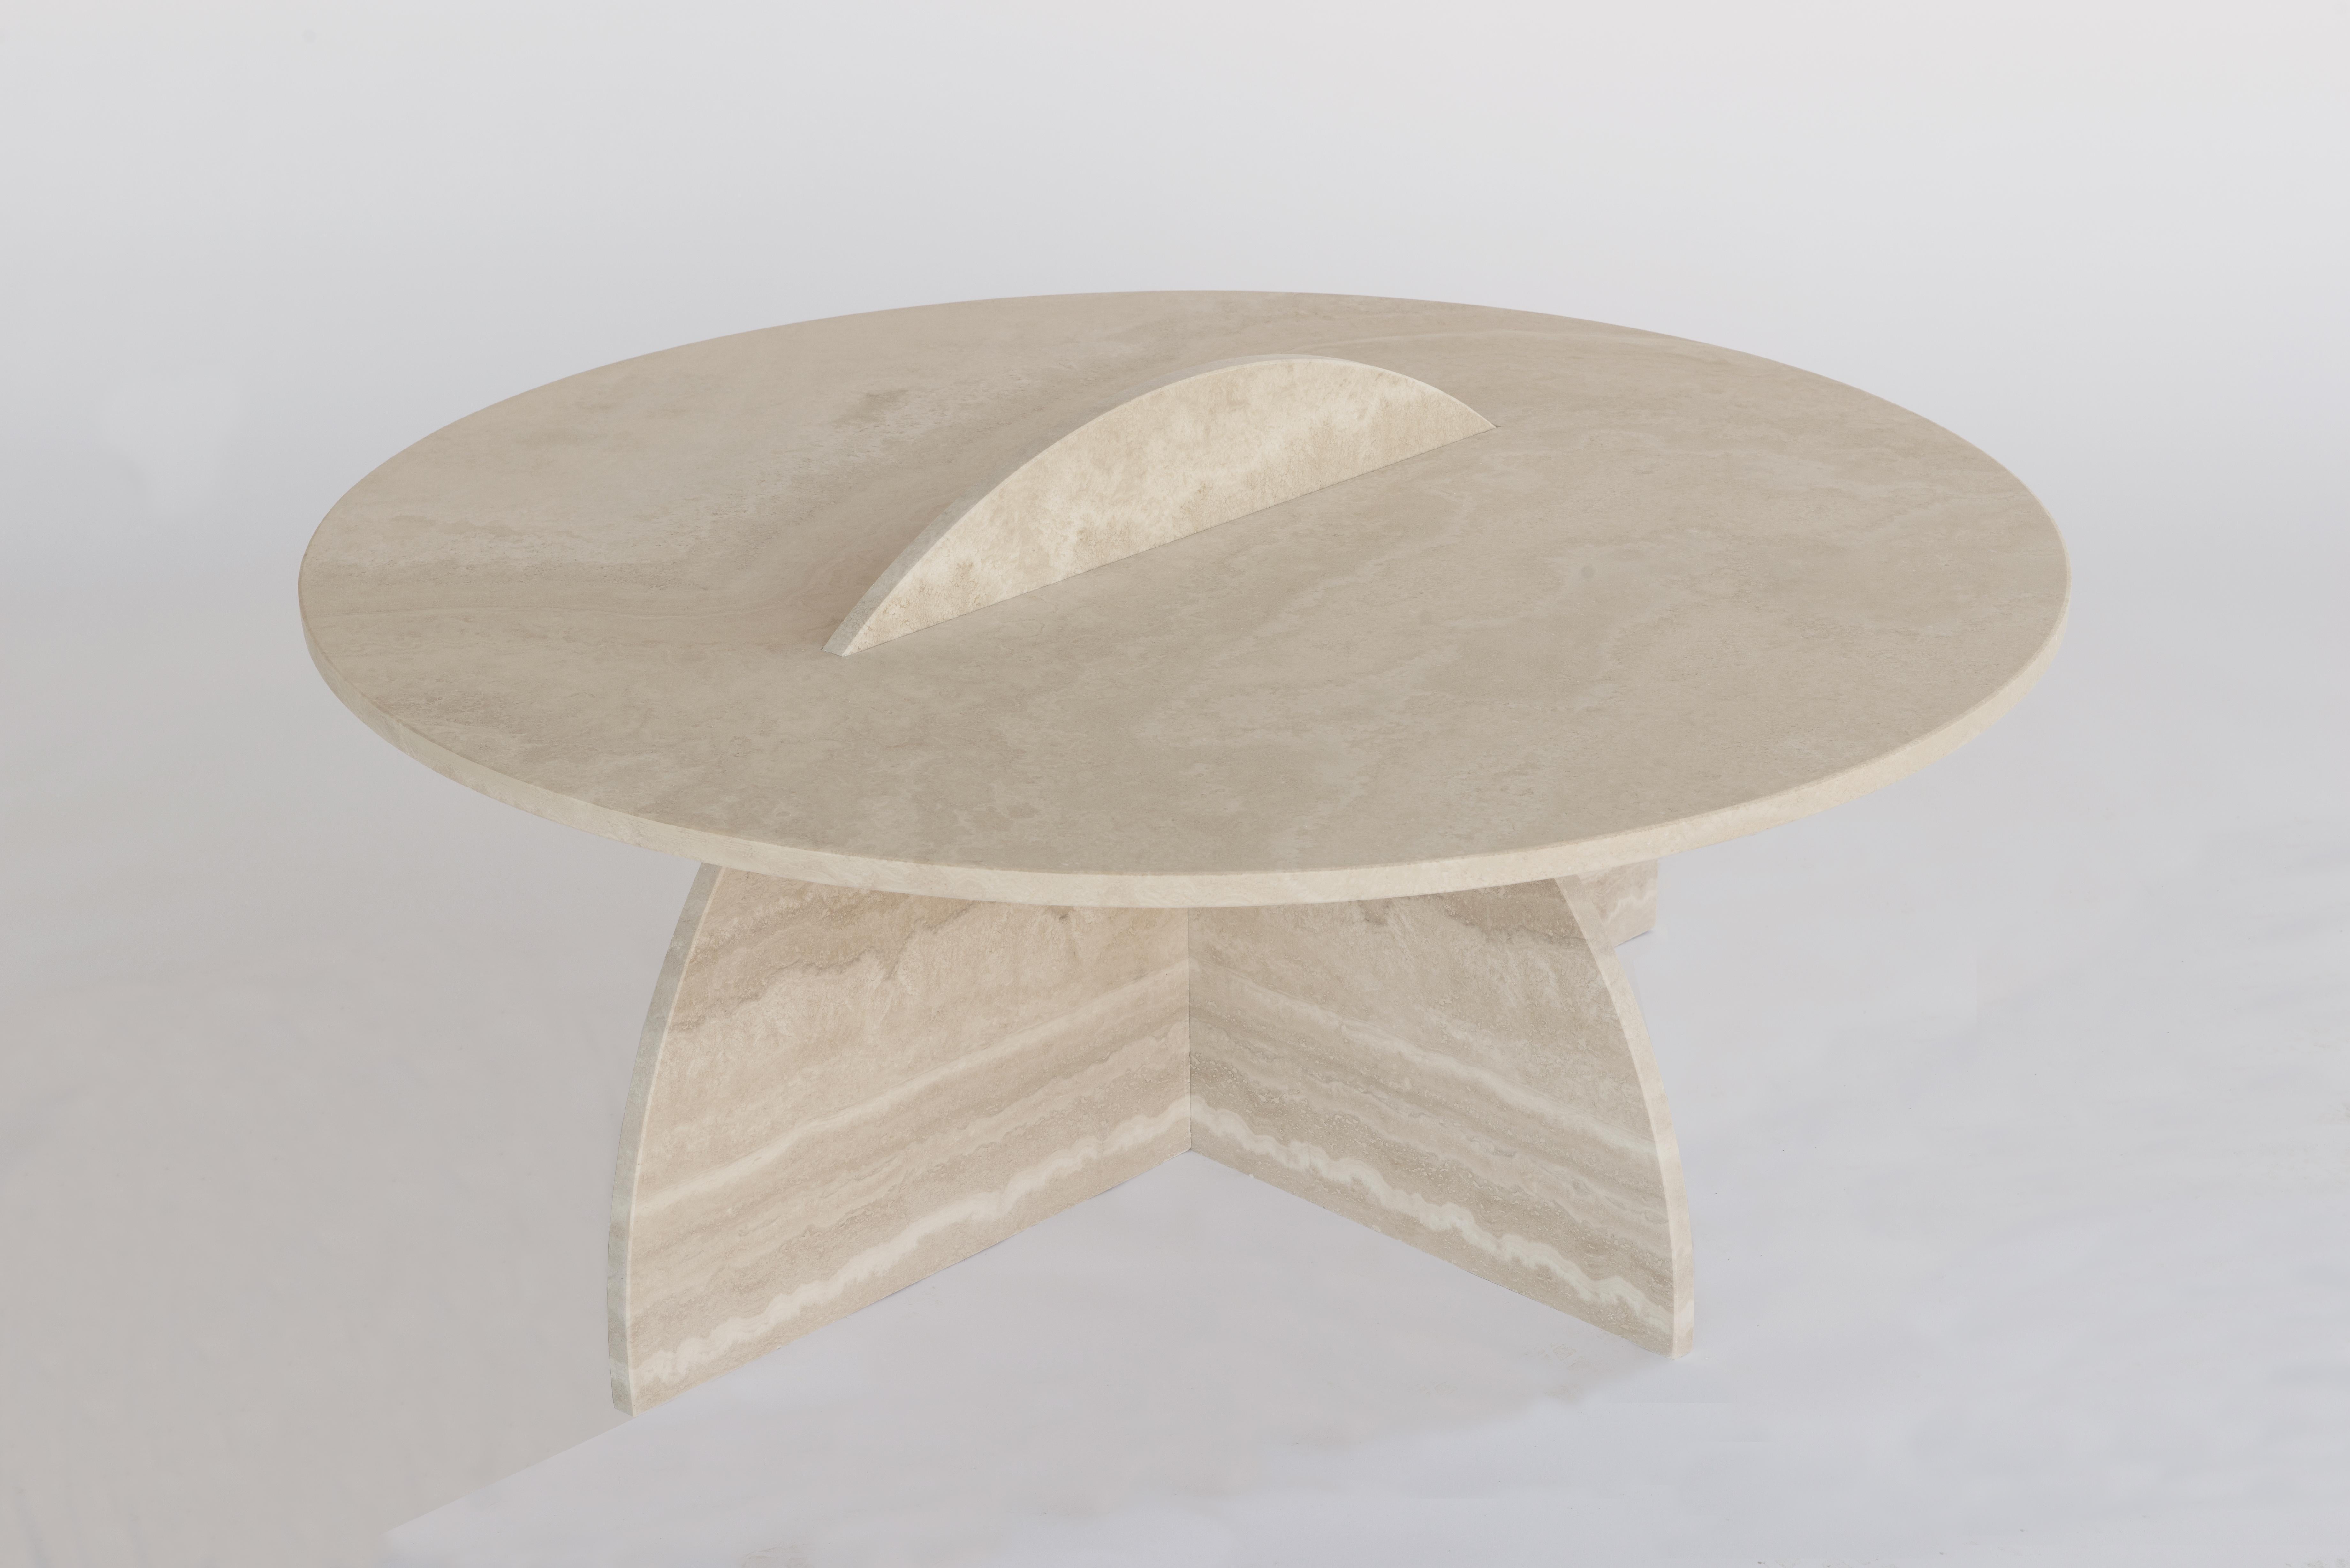 Roma coffee table by Emanuela Petrucci
Dimensions: D 120 x H 43 cm
Materials: Travertine interlocking pieces
Finishes: Brushed, filled with cement

Roma is a coffe table designed by Architect Emanuela Petrucci to celebrate the city of Rome by the